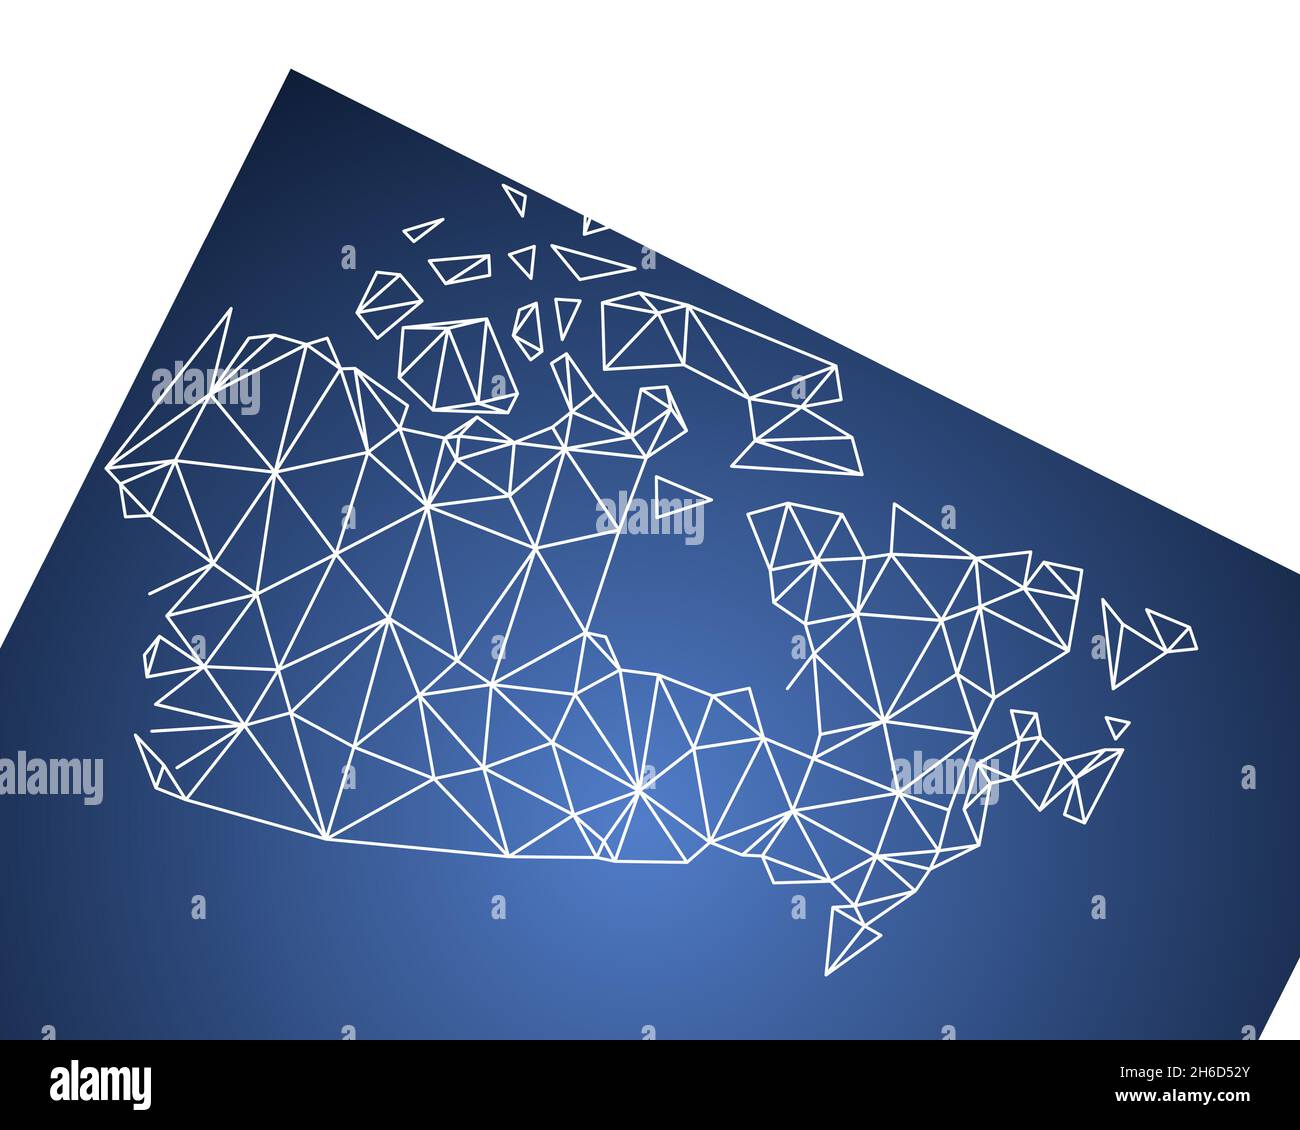 Canada polygon map. Low poly modern style vector map of Canada with connecting dots network. Stock Vector